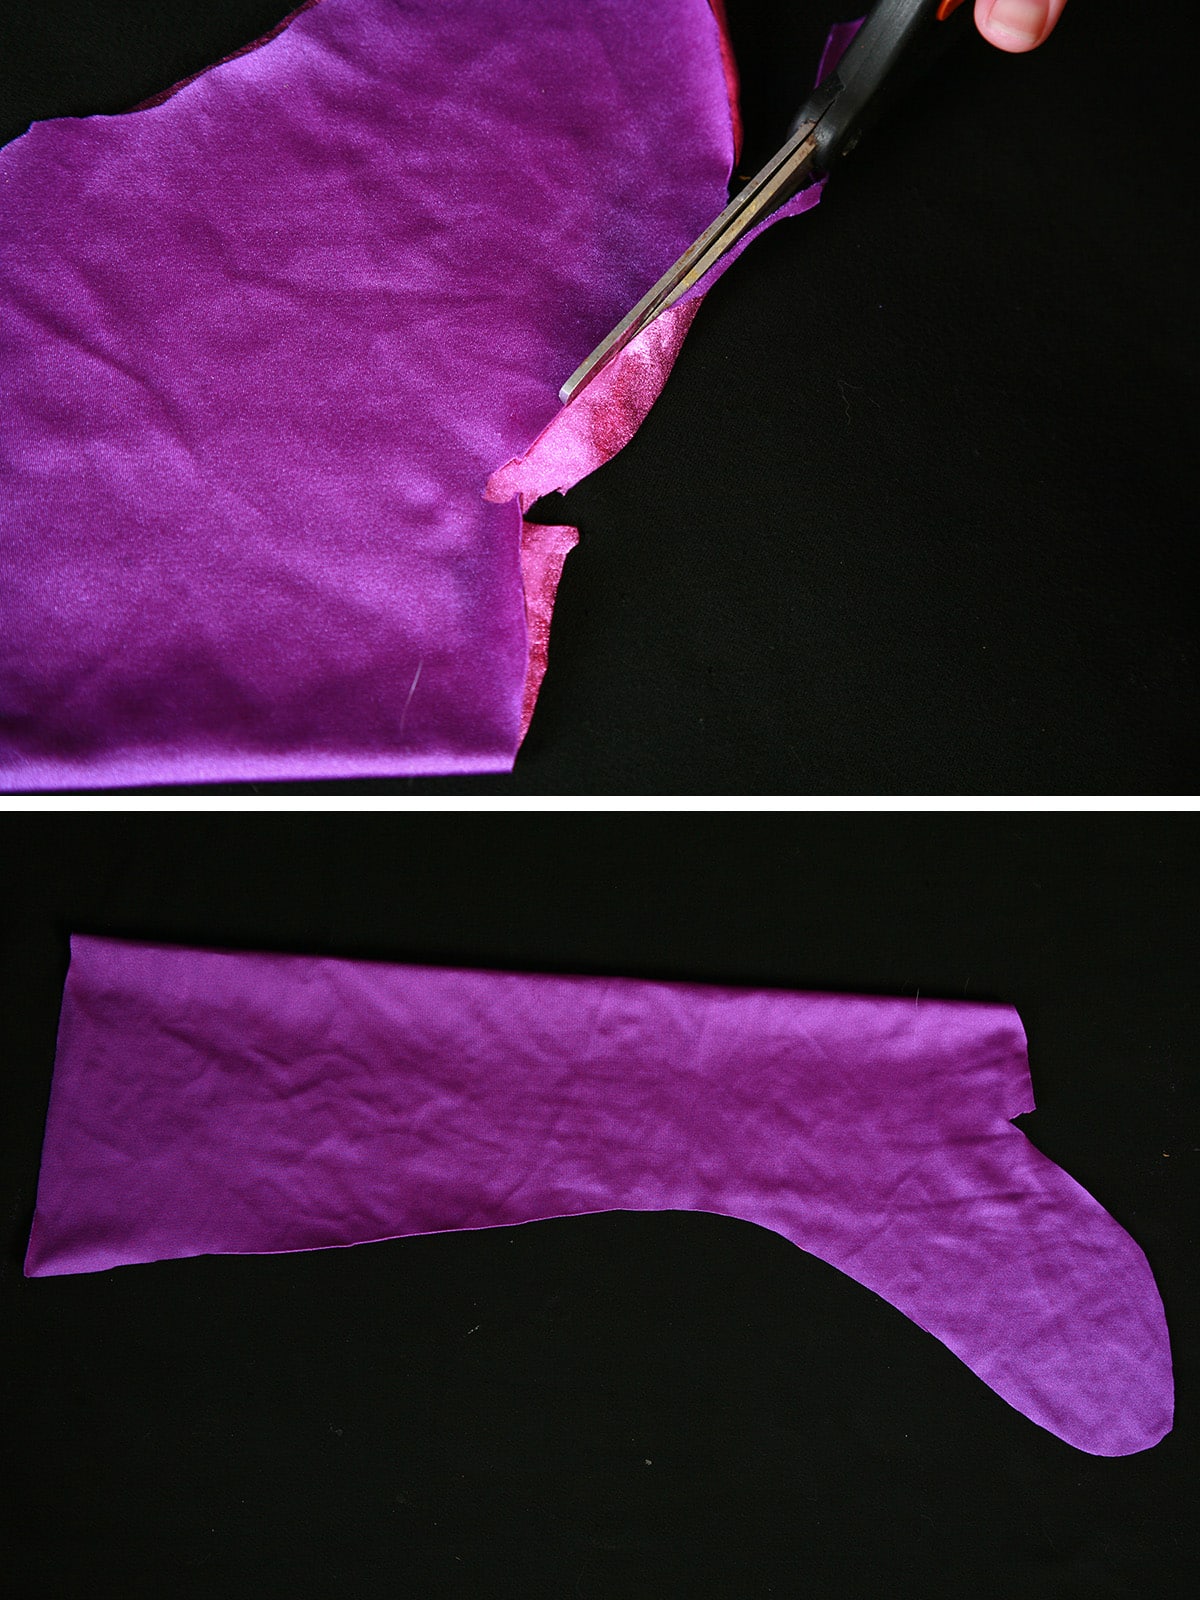 A two photo compilation image showing purple fabric in the shape of a boot cover being trimmed.